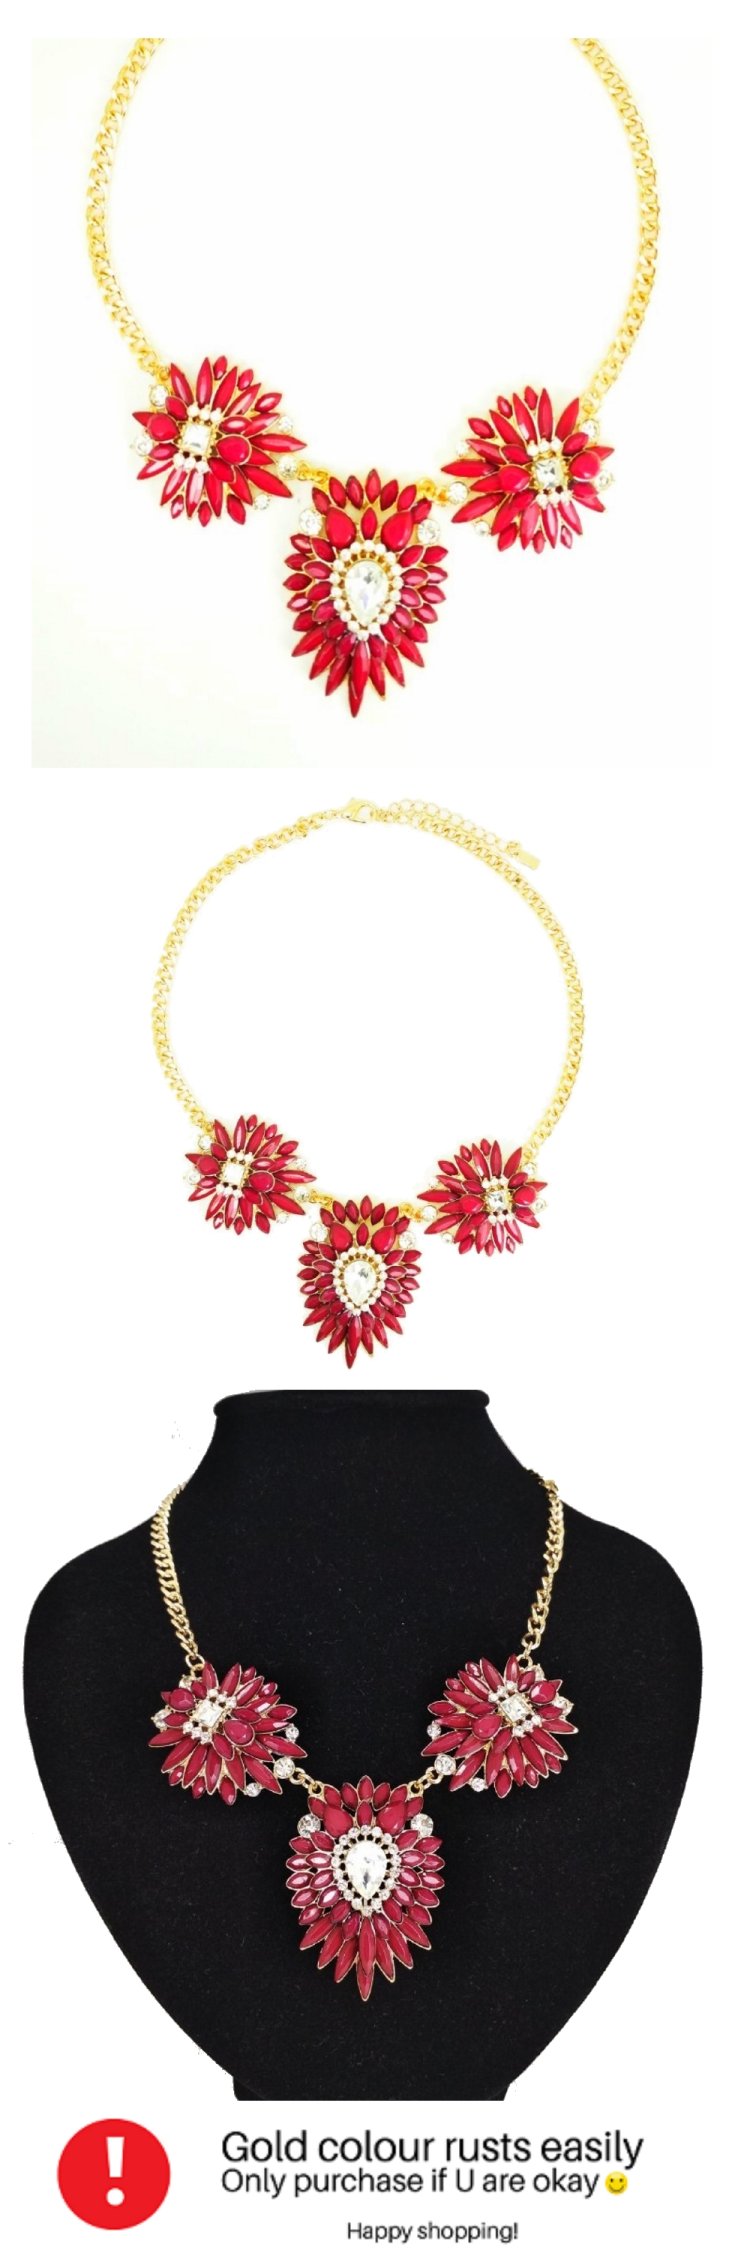 a-un-002 Hot Red Gems With Crystals Gold Statement Necklaces